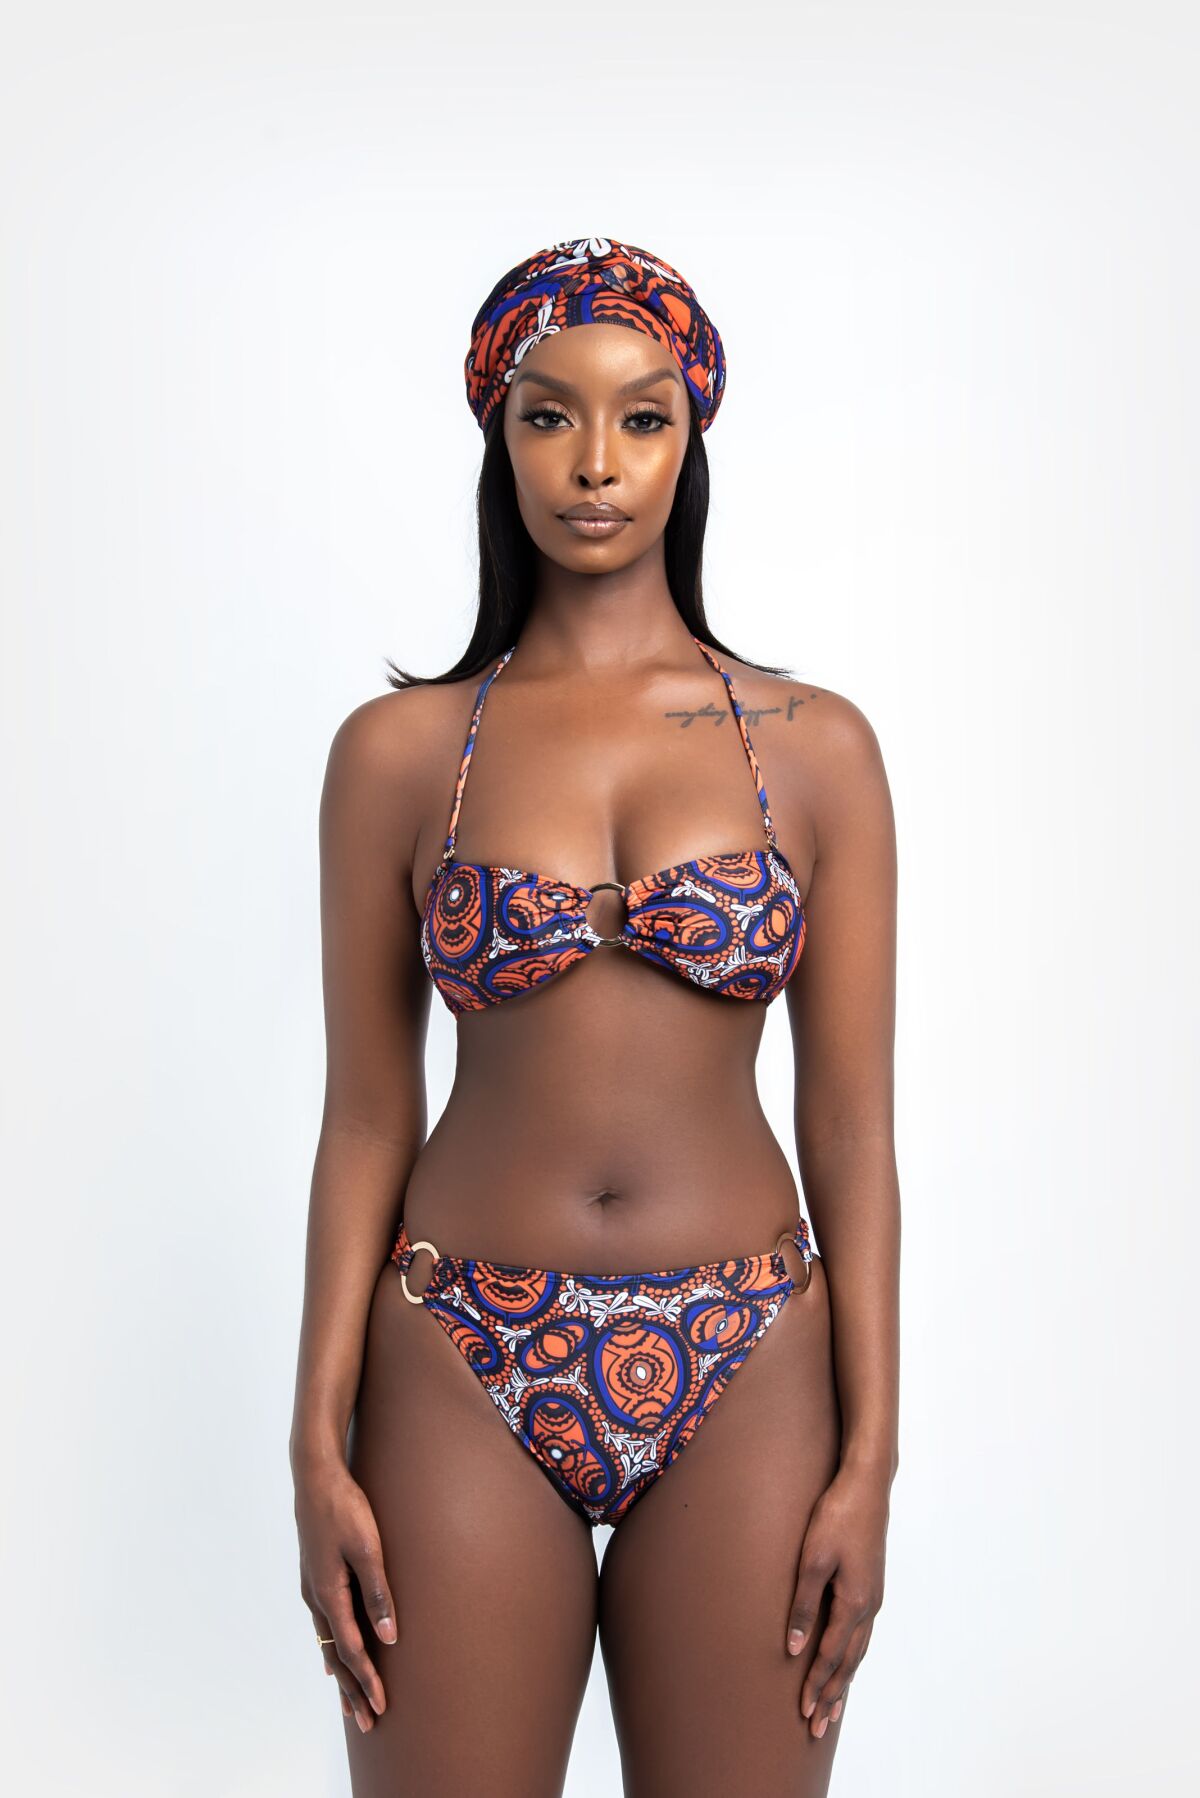 Öfuurë's Semira top and bottom features a blue, orange, and white African print